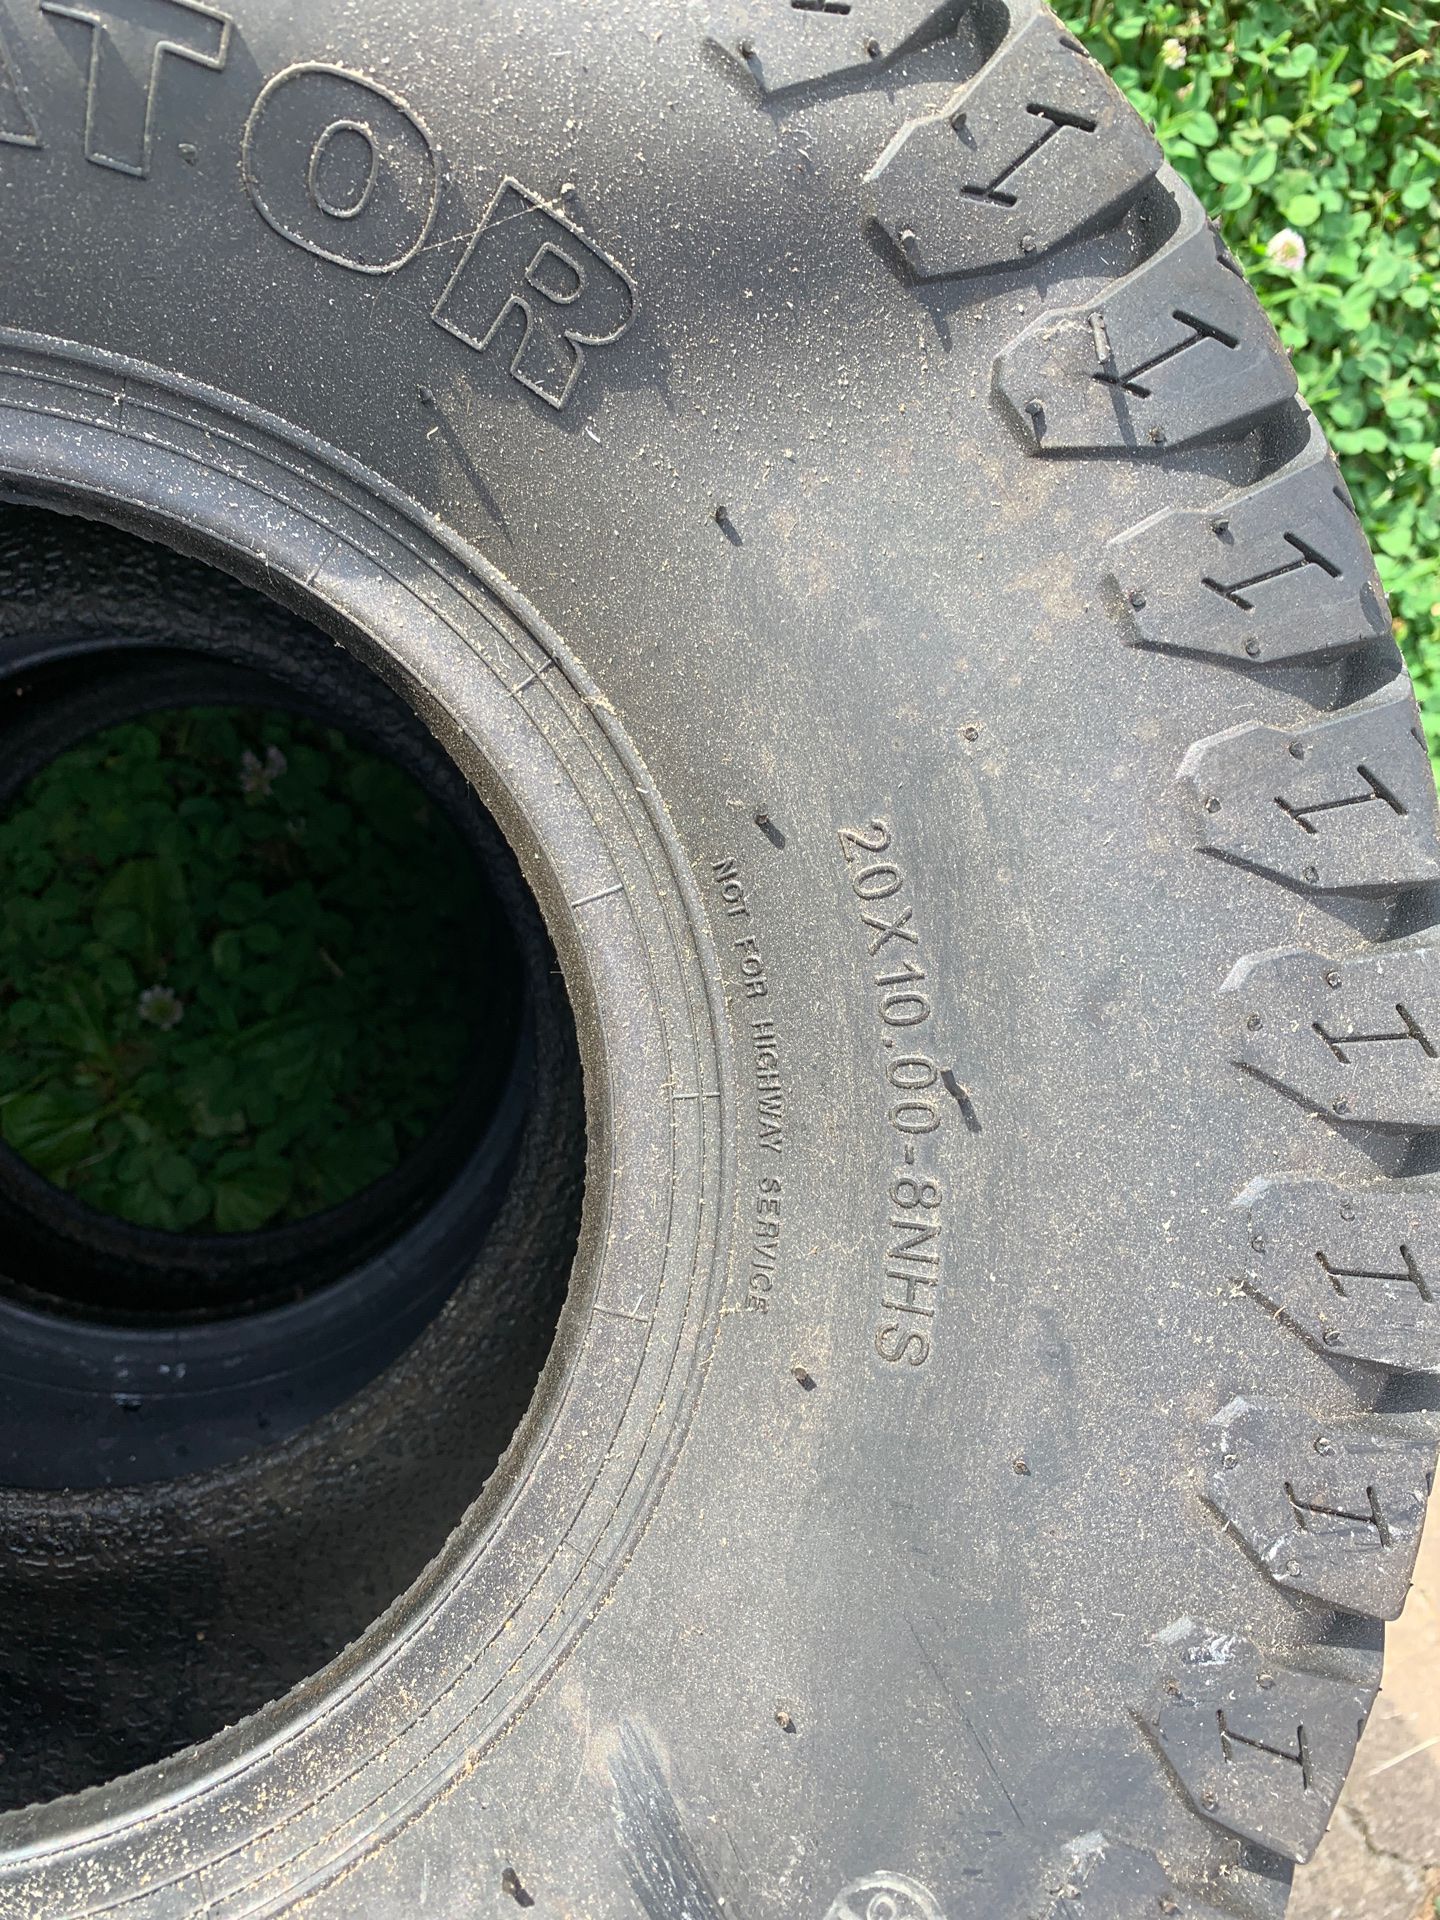 Brand new Gladiator Lawn Mower tires. Never used.